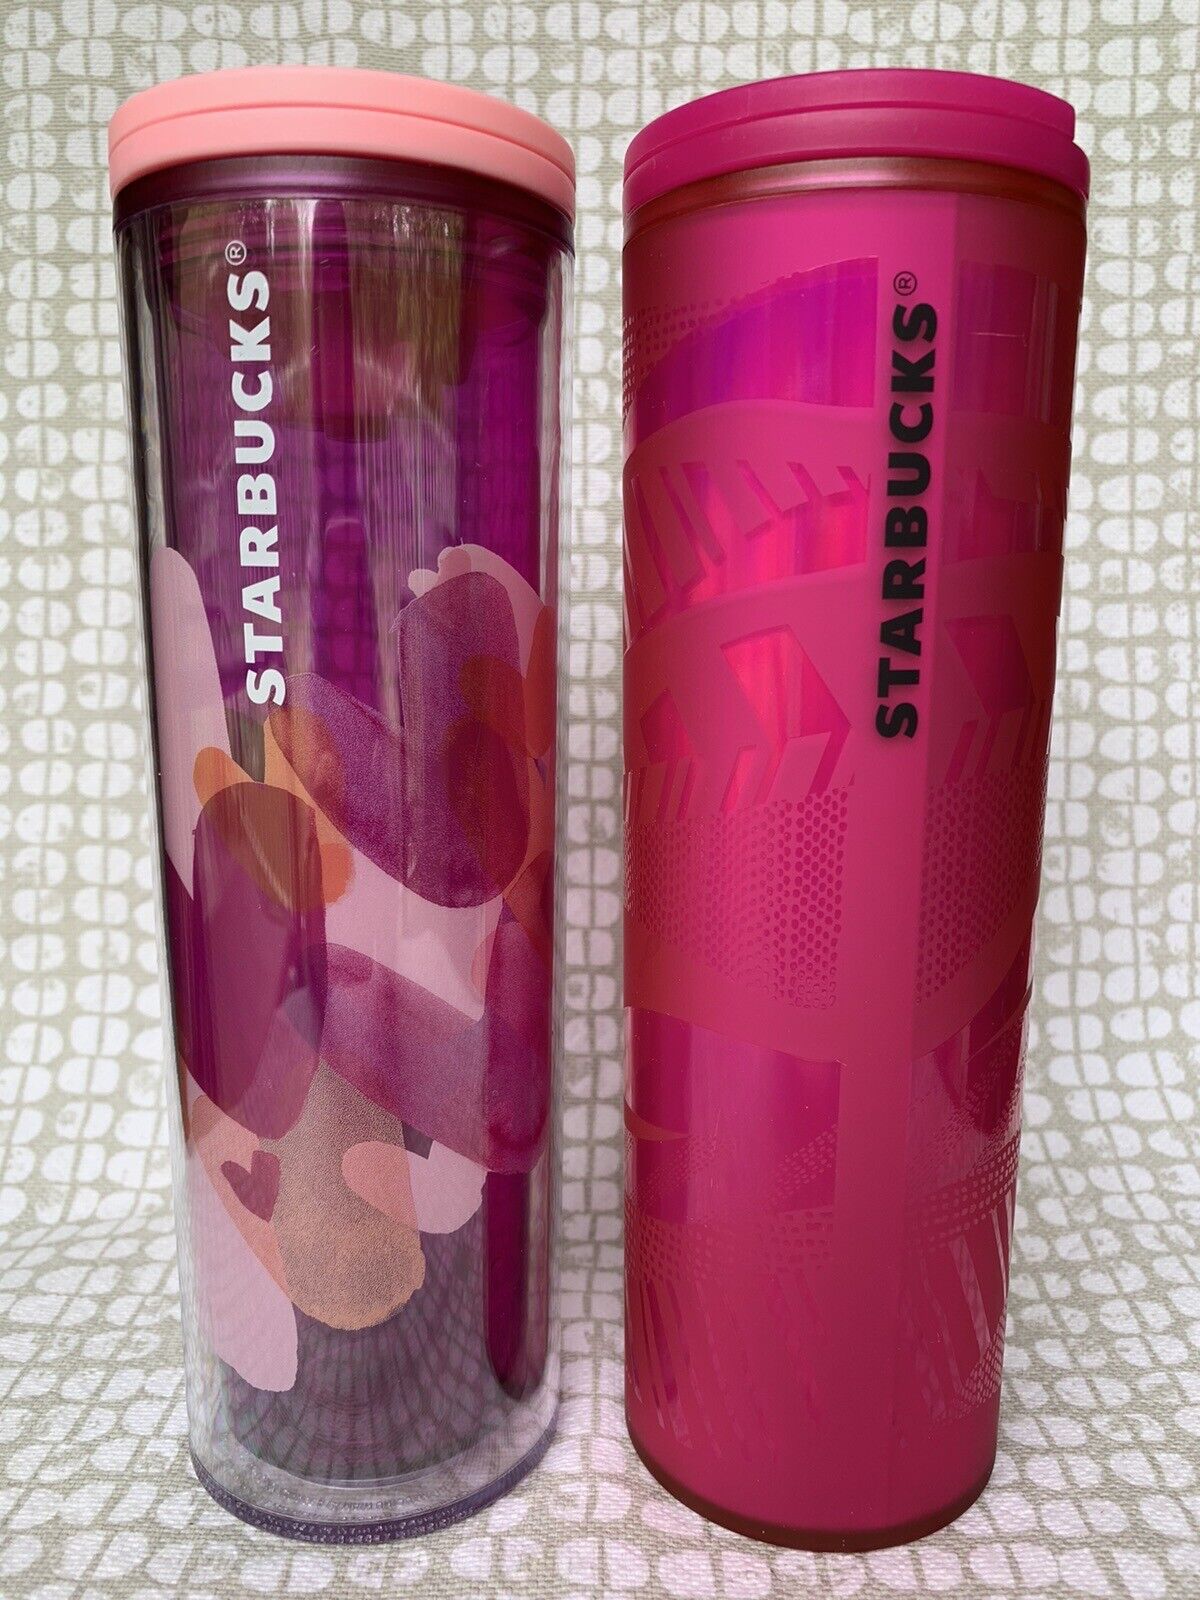 Lot 2 Starbucks Tumbler Sip Lid Cups Valentines Hearts 2020 & Holiday Pink 2021